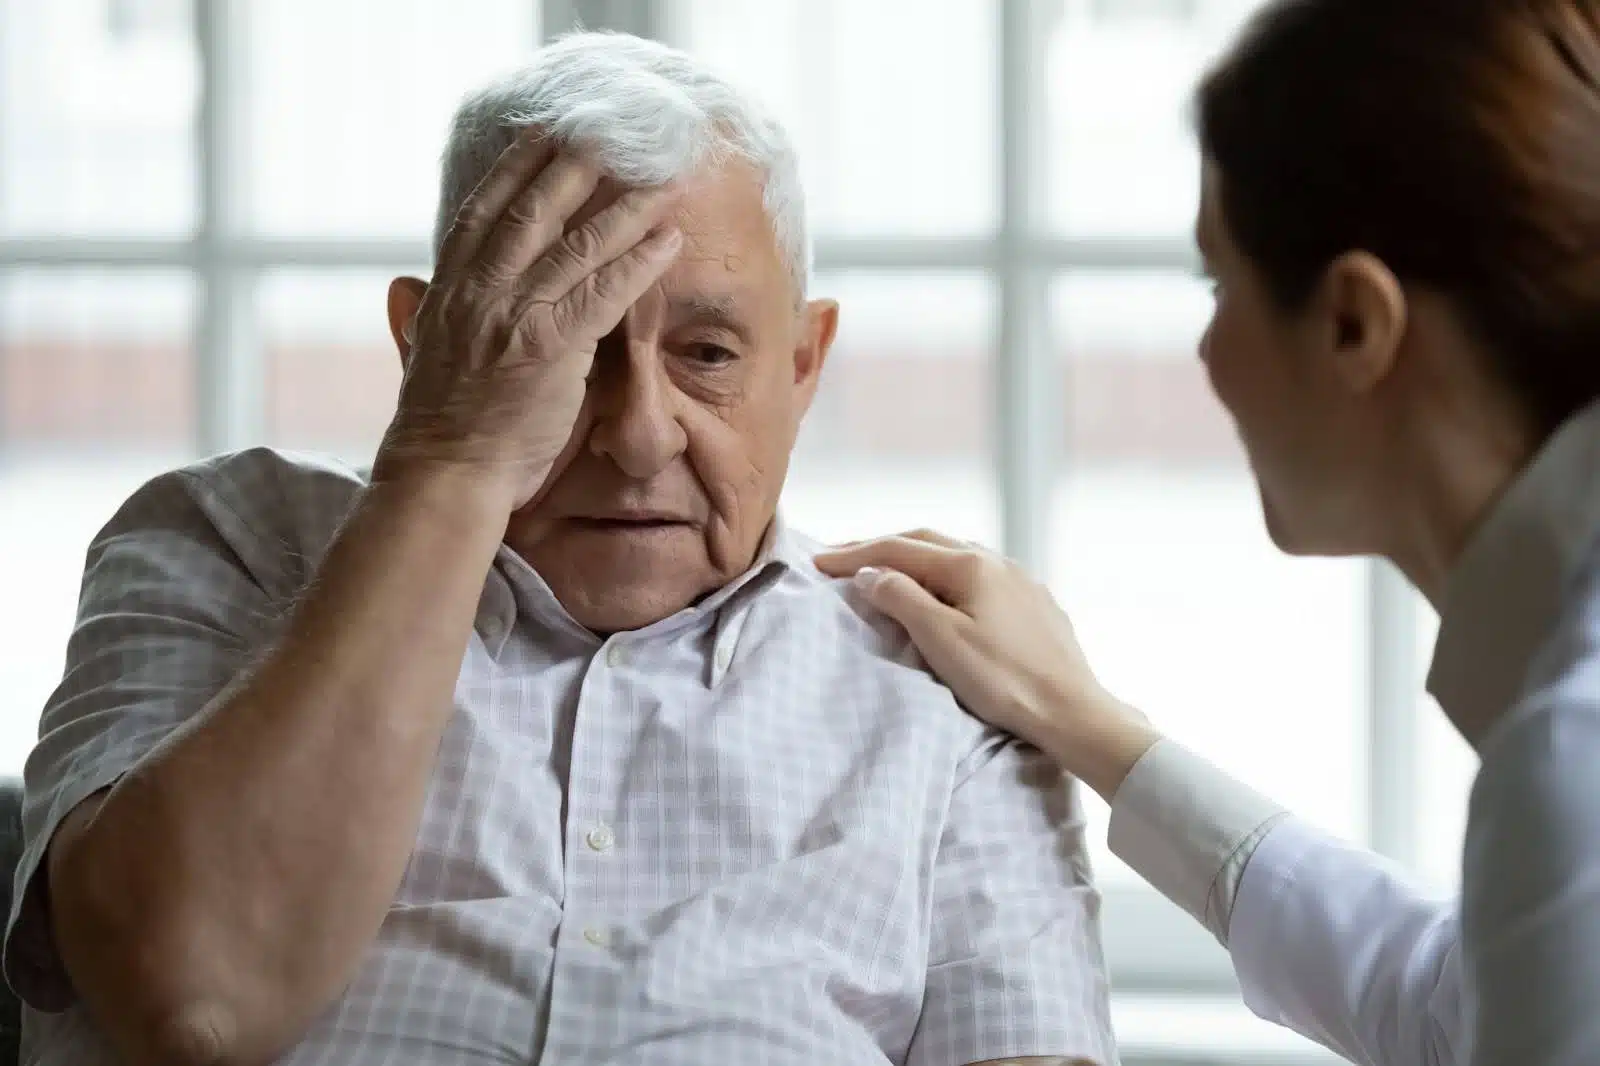 Older person looking stressed and being comforted.